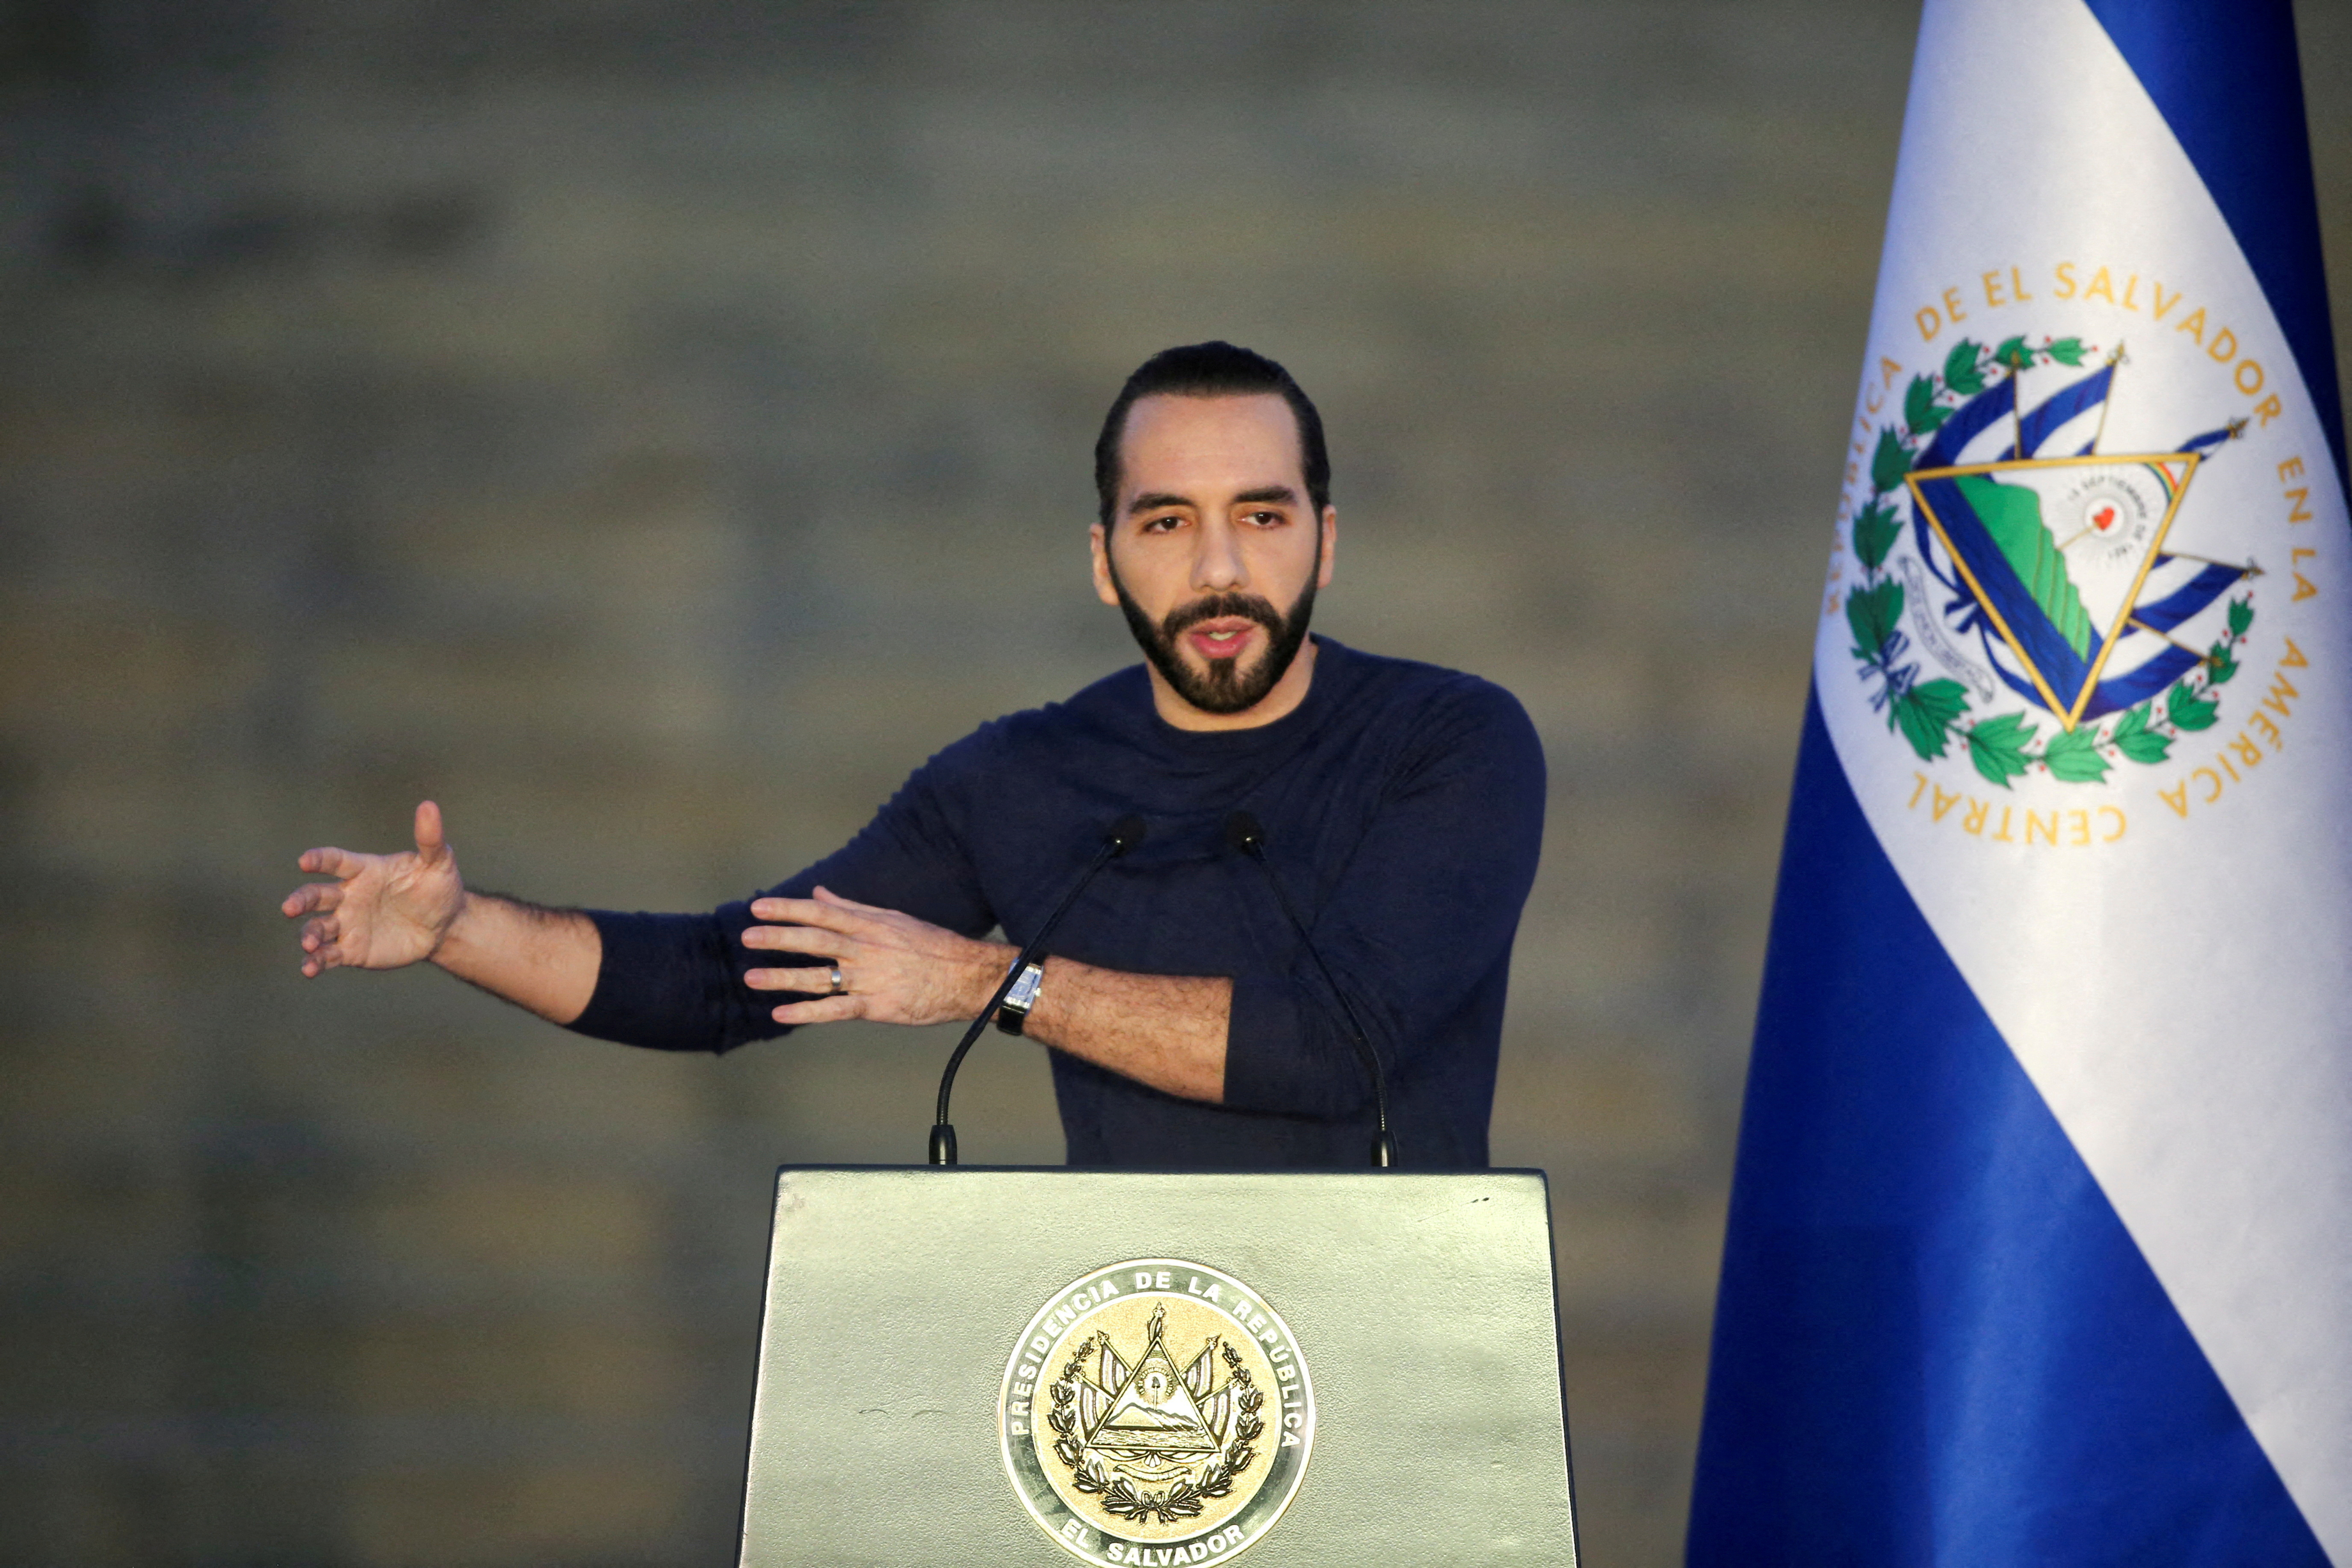 El Salvador's Bukele looks set to cruise to controversial presidential  reelection -poll